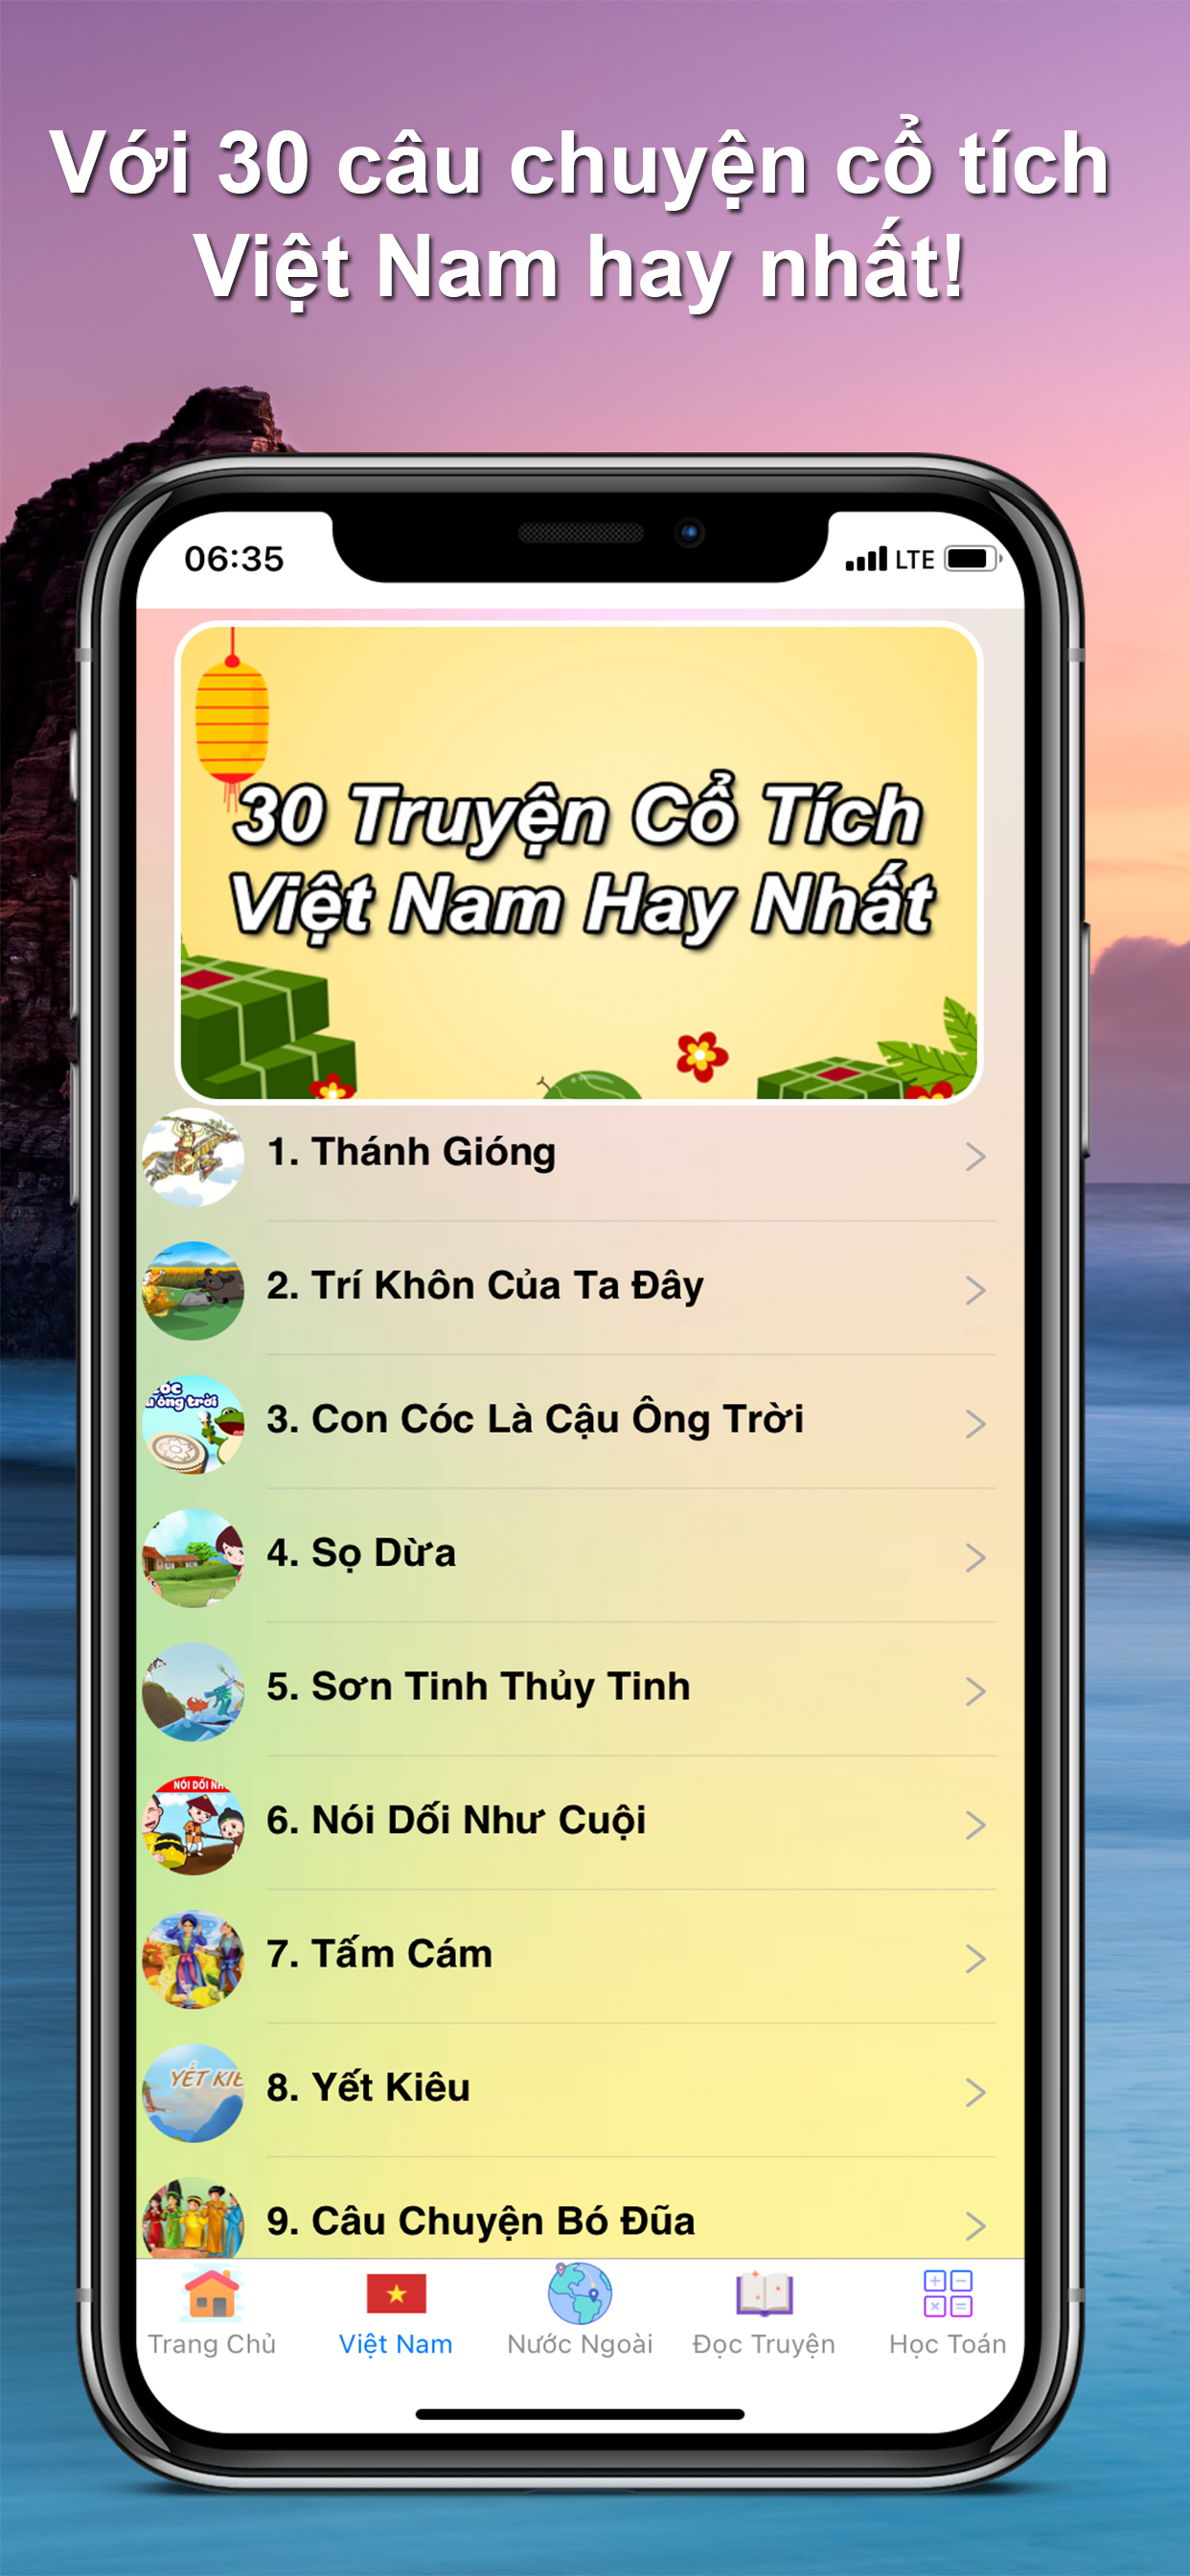 Top Apps for Android on Google Play in Vietnam · Appfigures